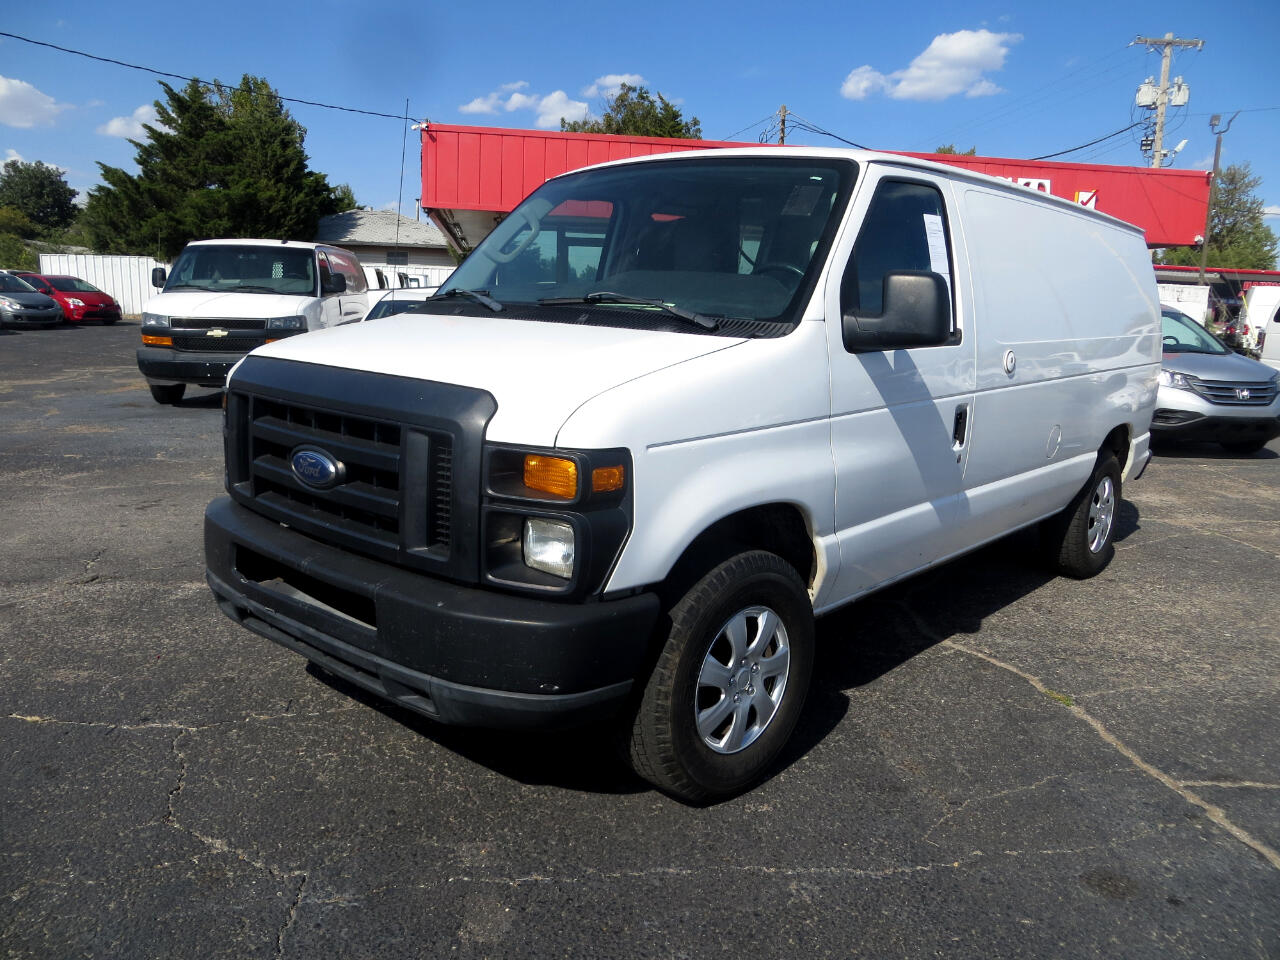 Used 2009 Ford E-250 XL for Sale in Oklahoma City OK 73122 Auto Select